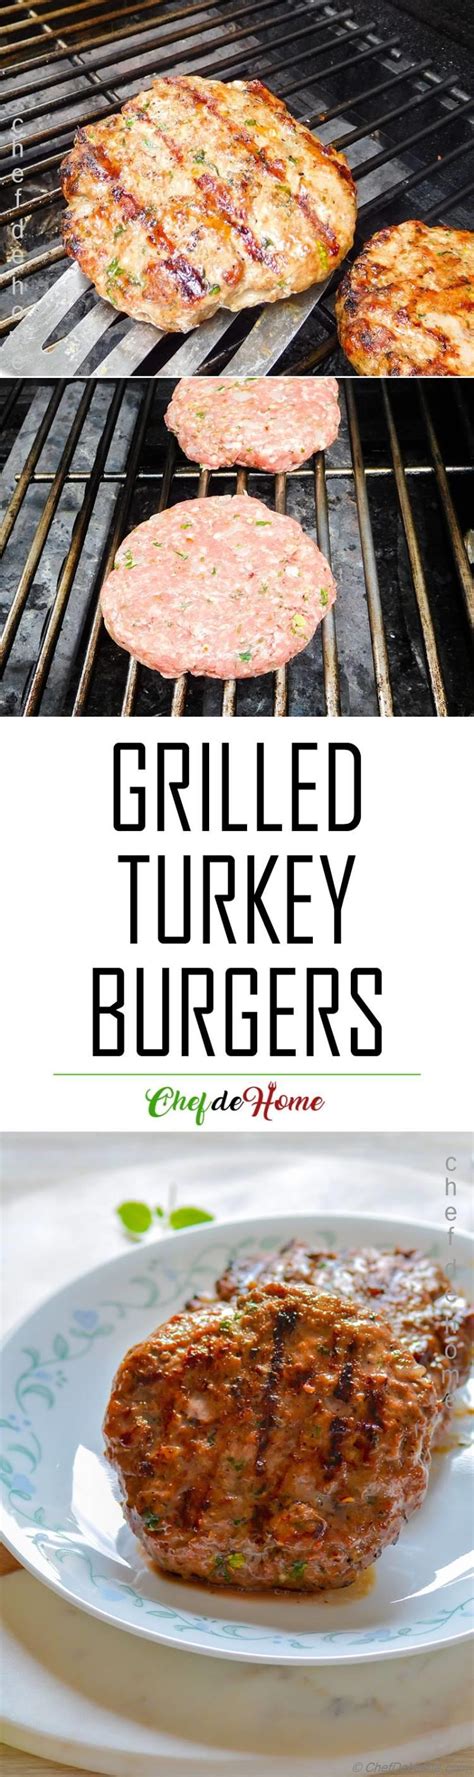 How To Make Grilled Turkey Burger Recipe Chefdehome Com